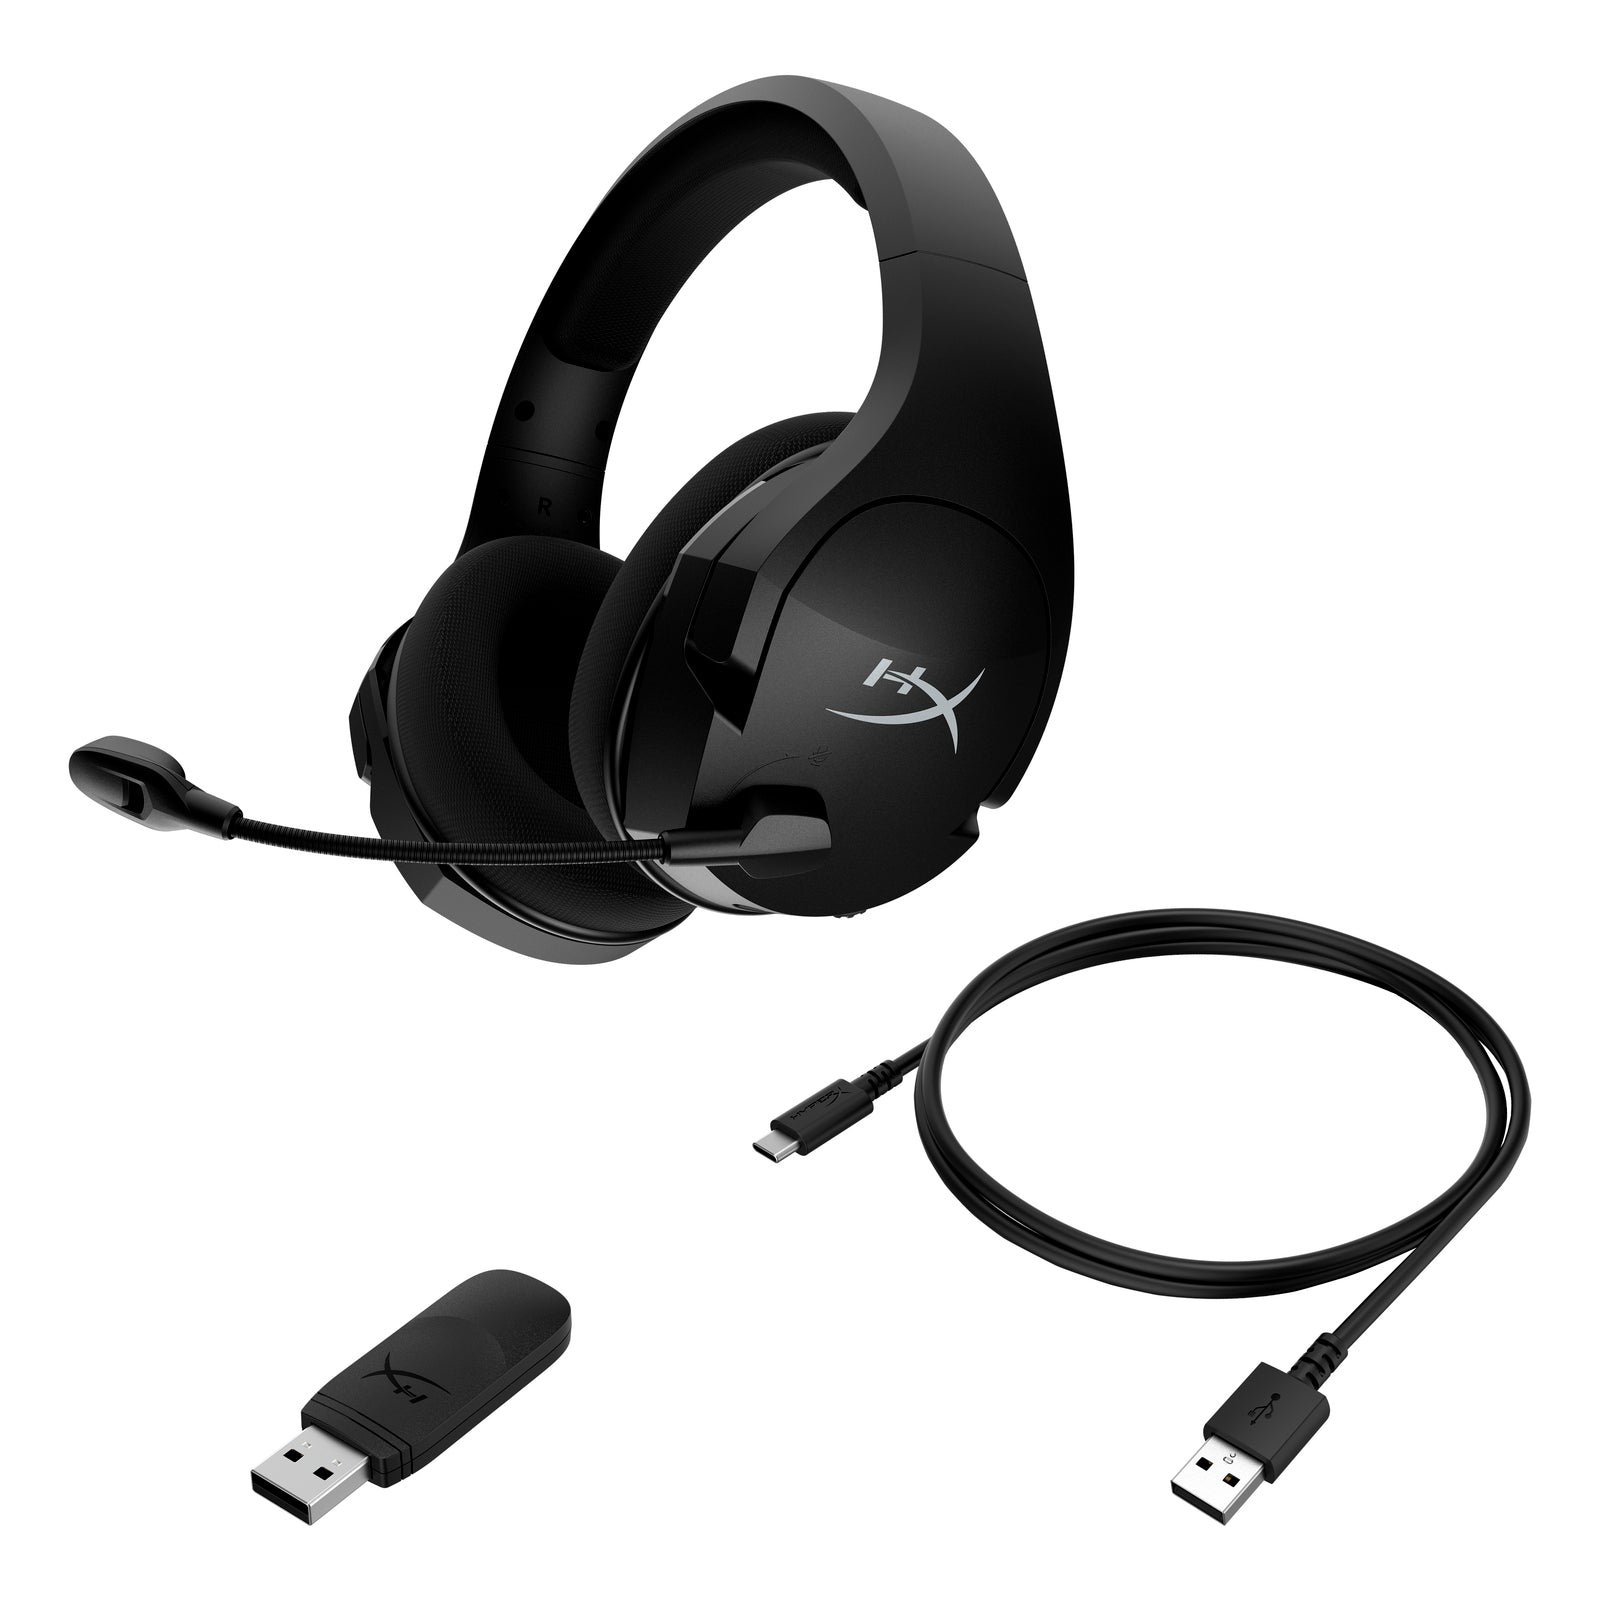 HyperX Cloud Stinger Core wireless gaming headset featuring charging cable and USB wireless adapter